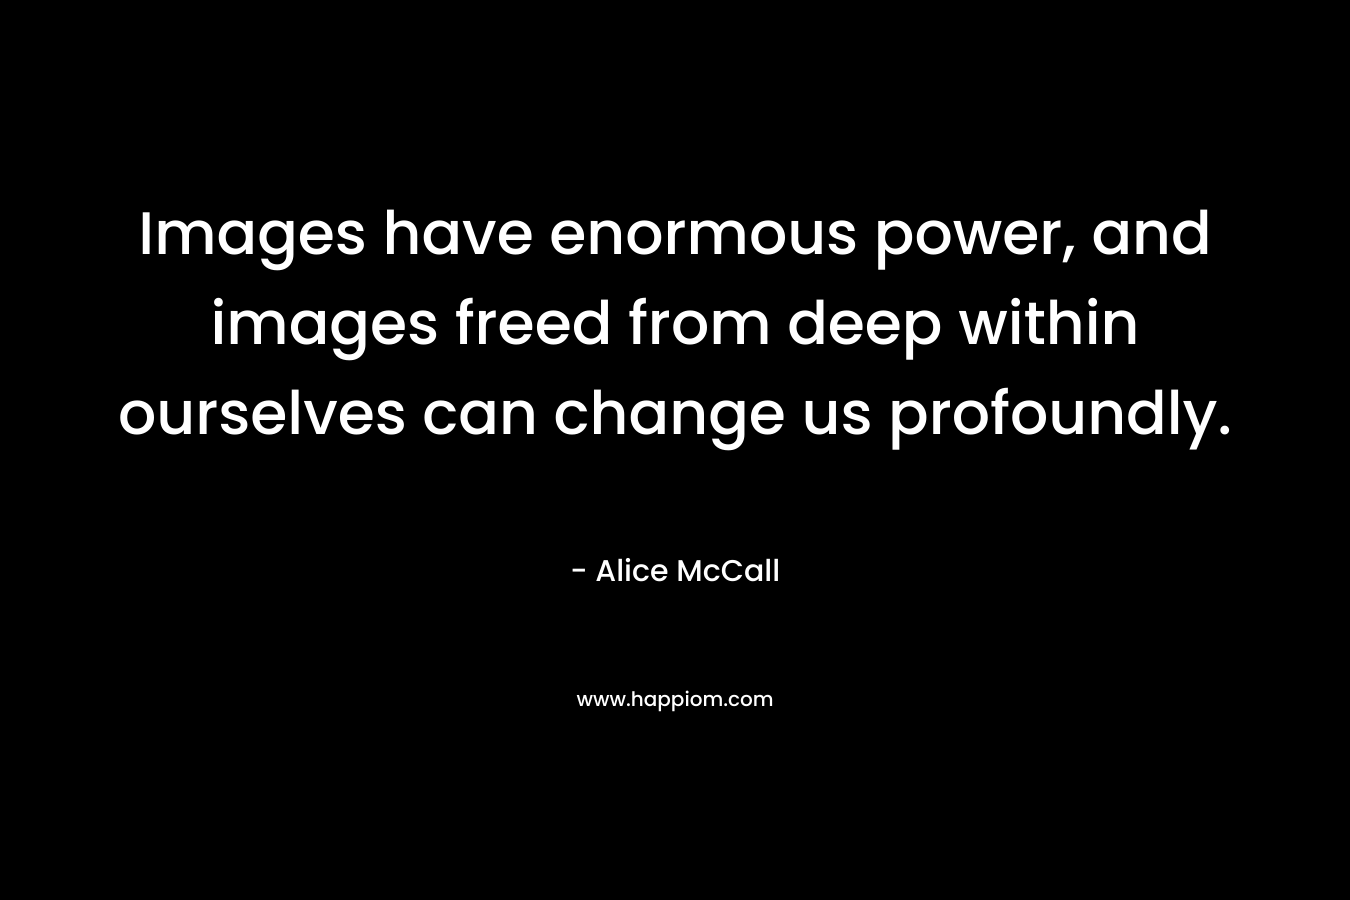 Images have enormous power, and images freed from deep within ourselves can change us profoundly. – Alice McCall